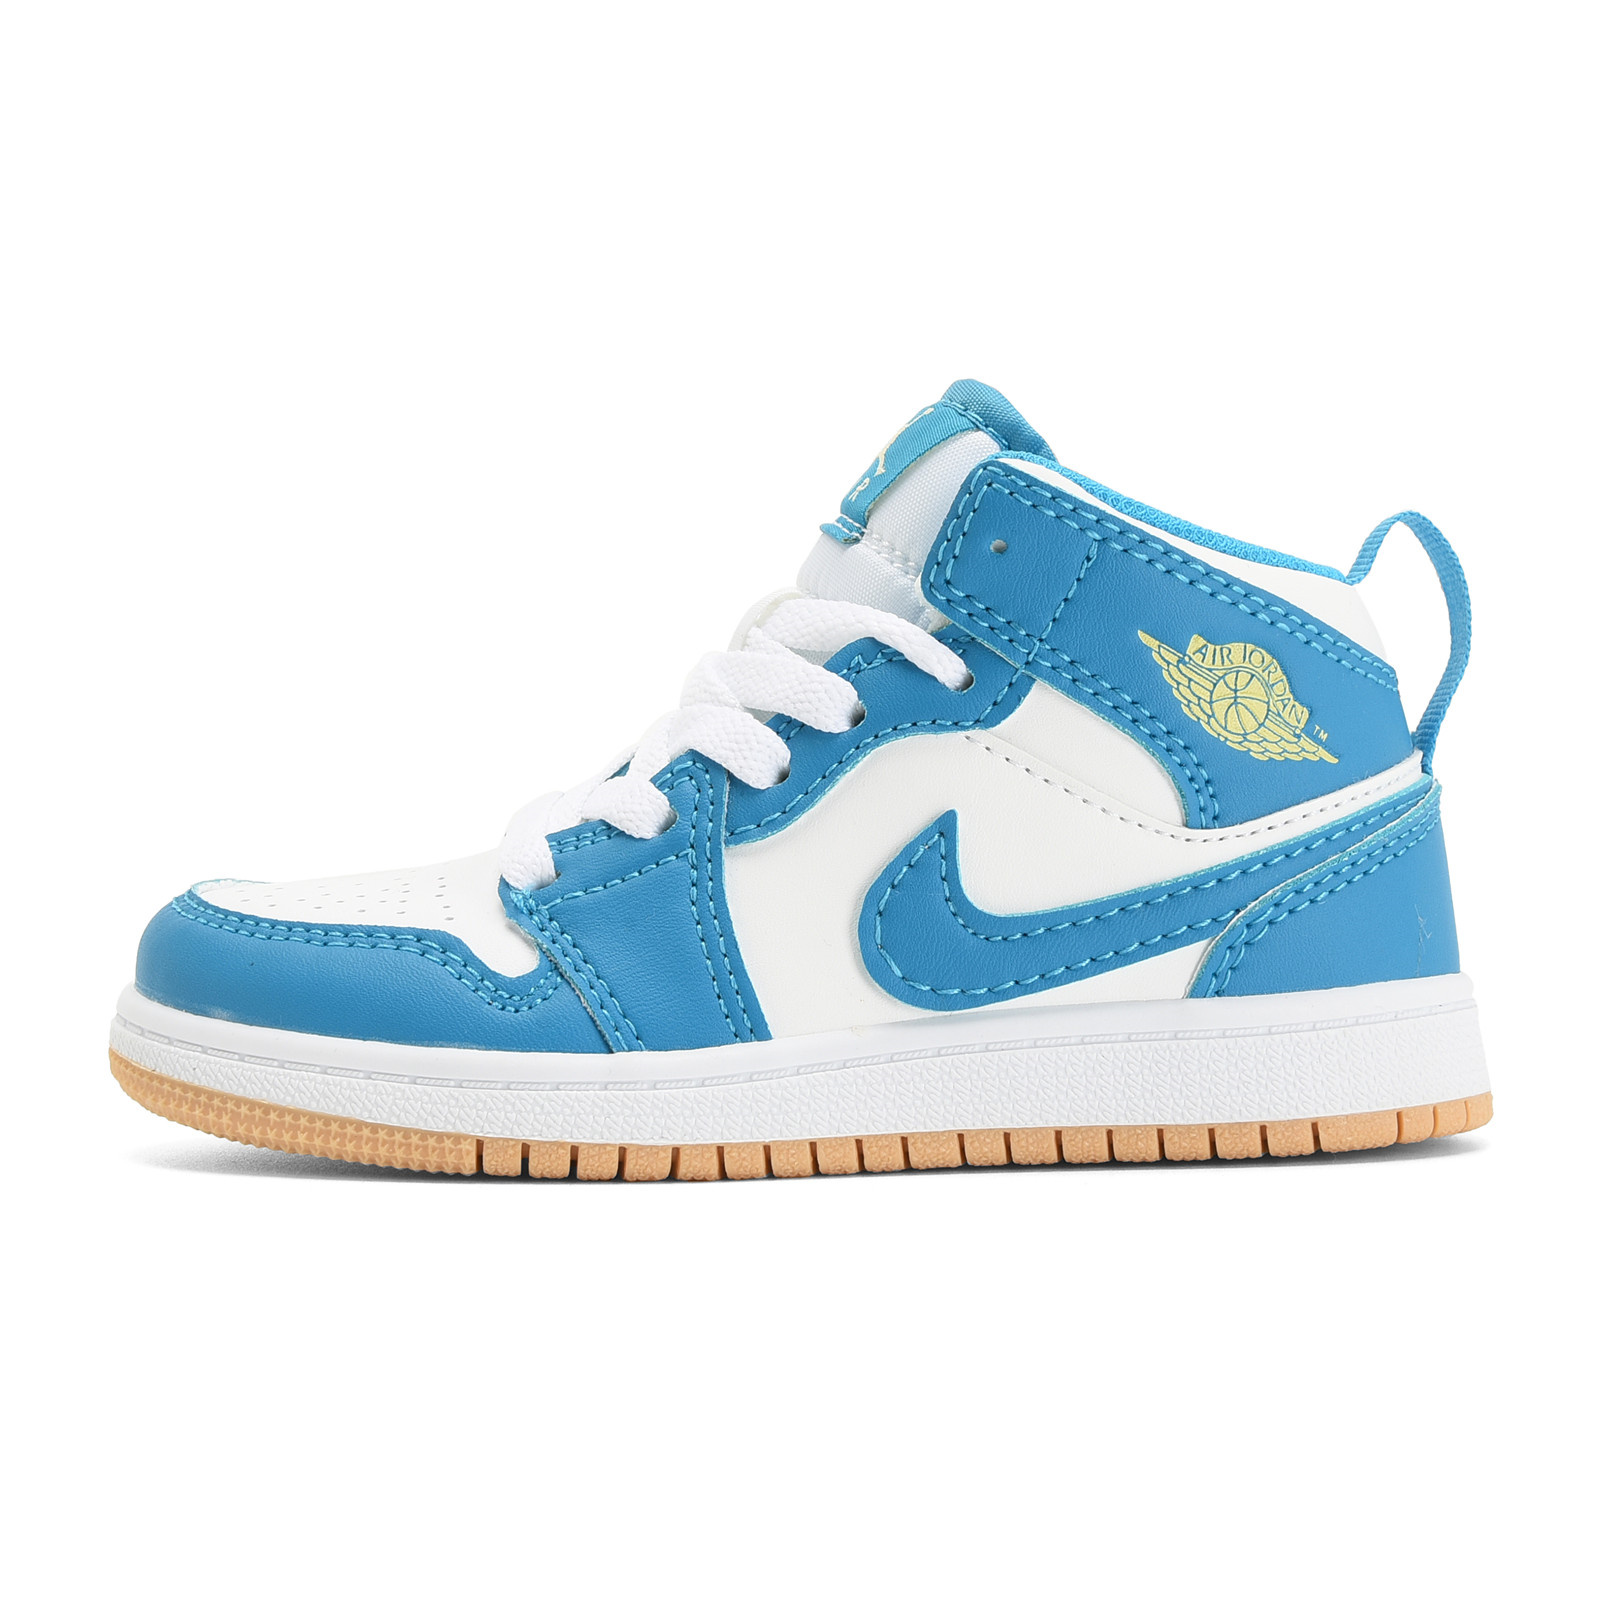 Youth Running Weapon Air Jordan 1 White/Blue Shoes 0109